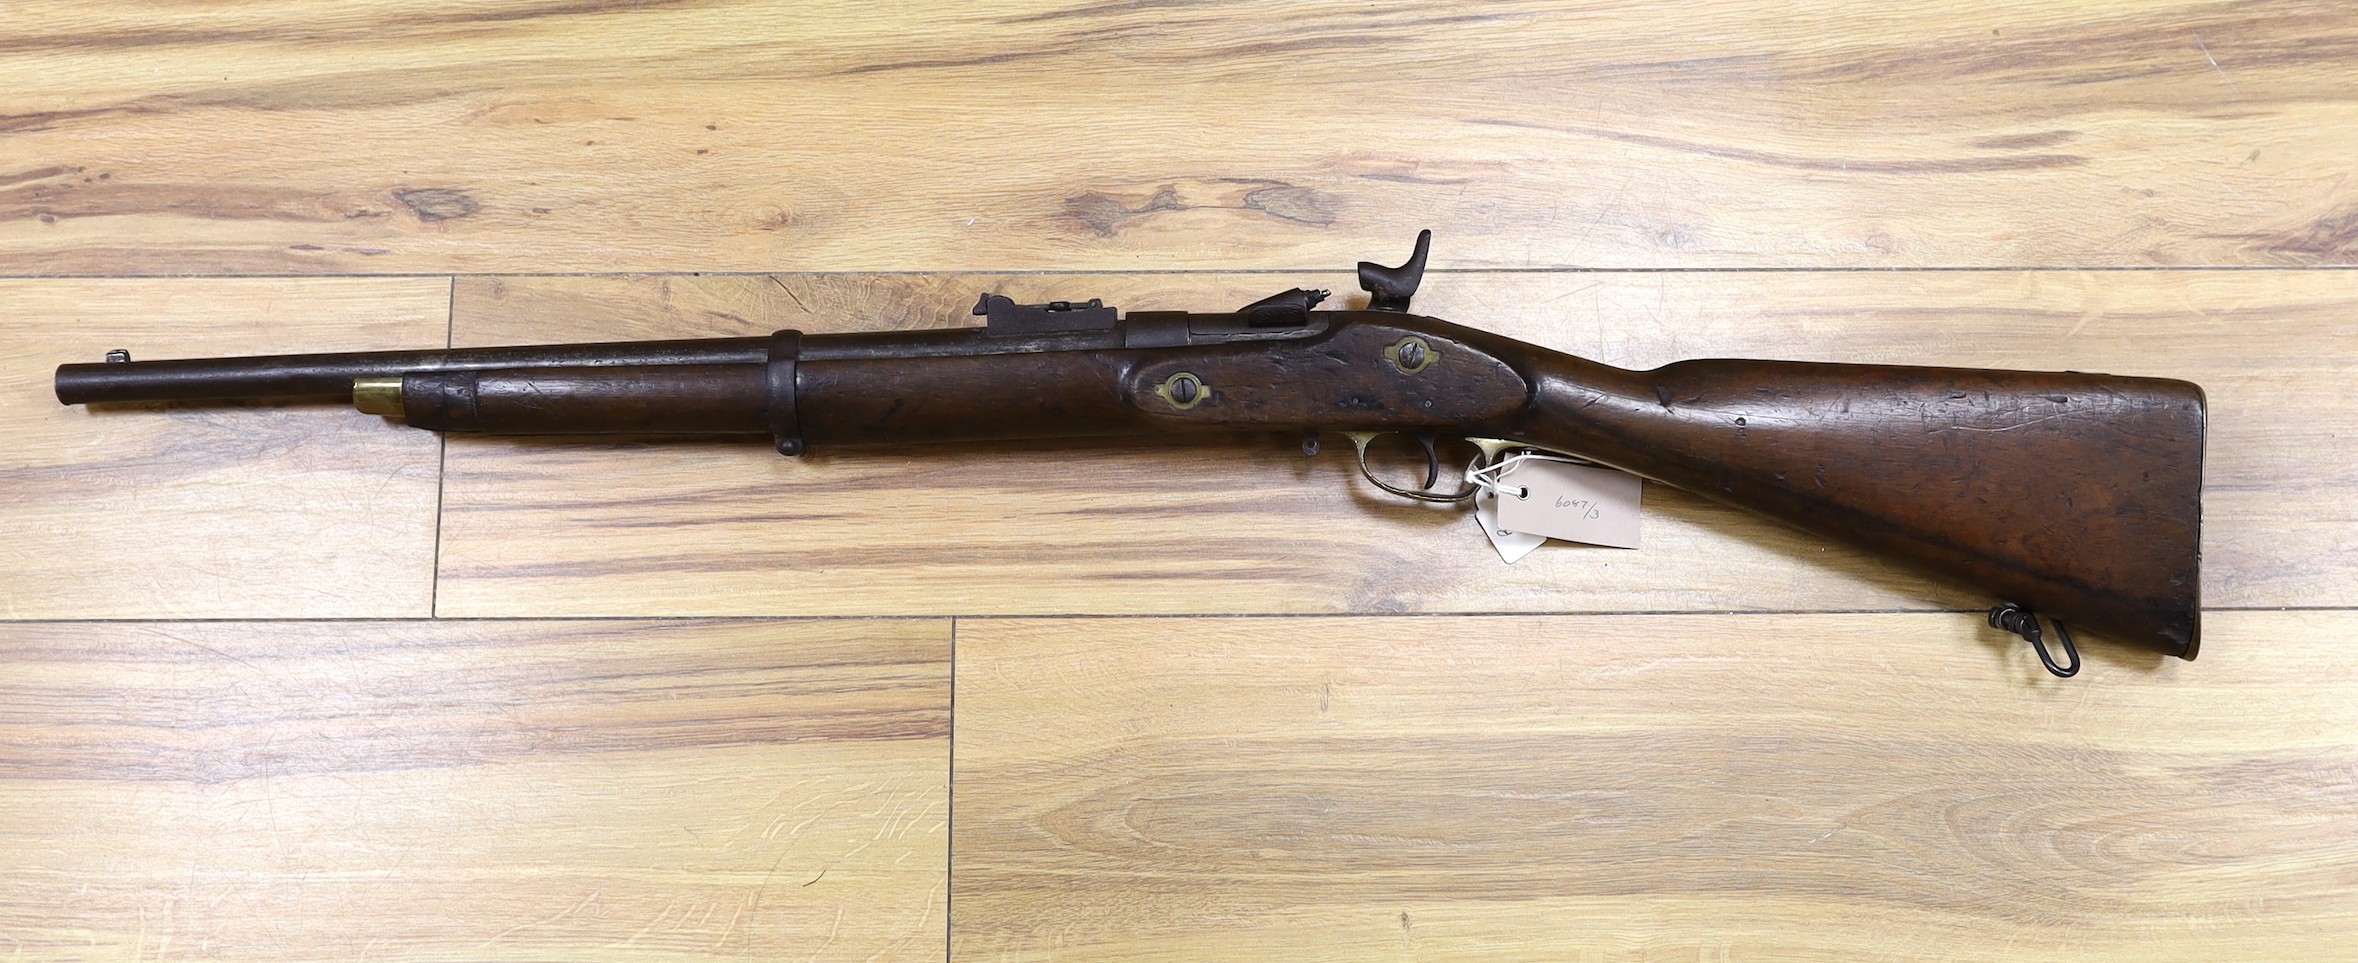 An early 20th century Snider .577 carbine rifle, 95cm long